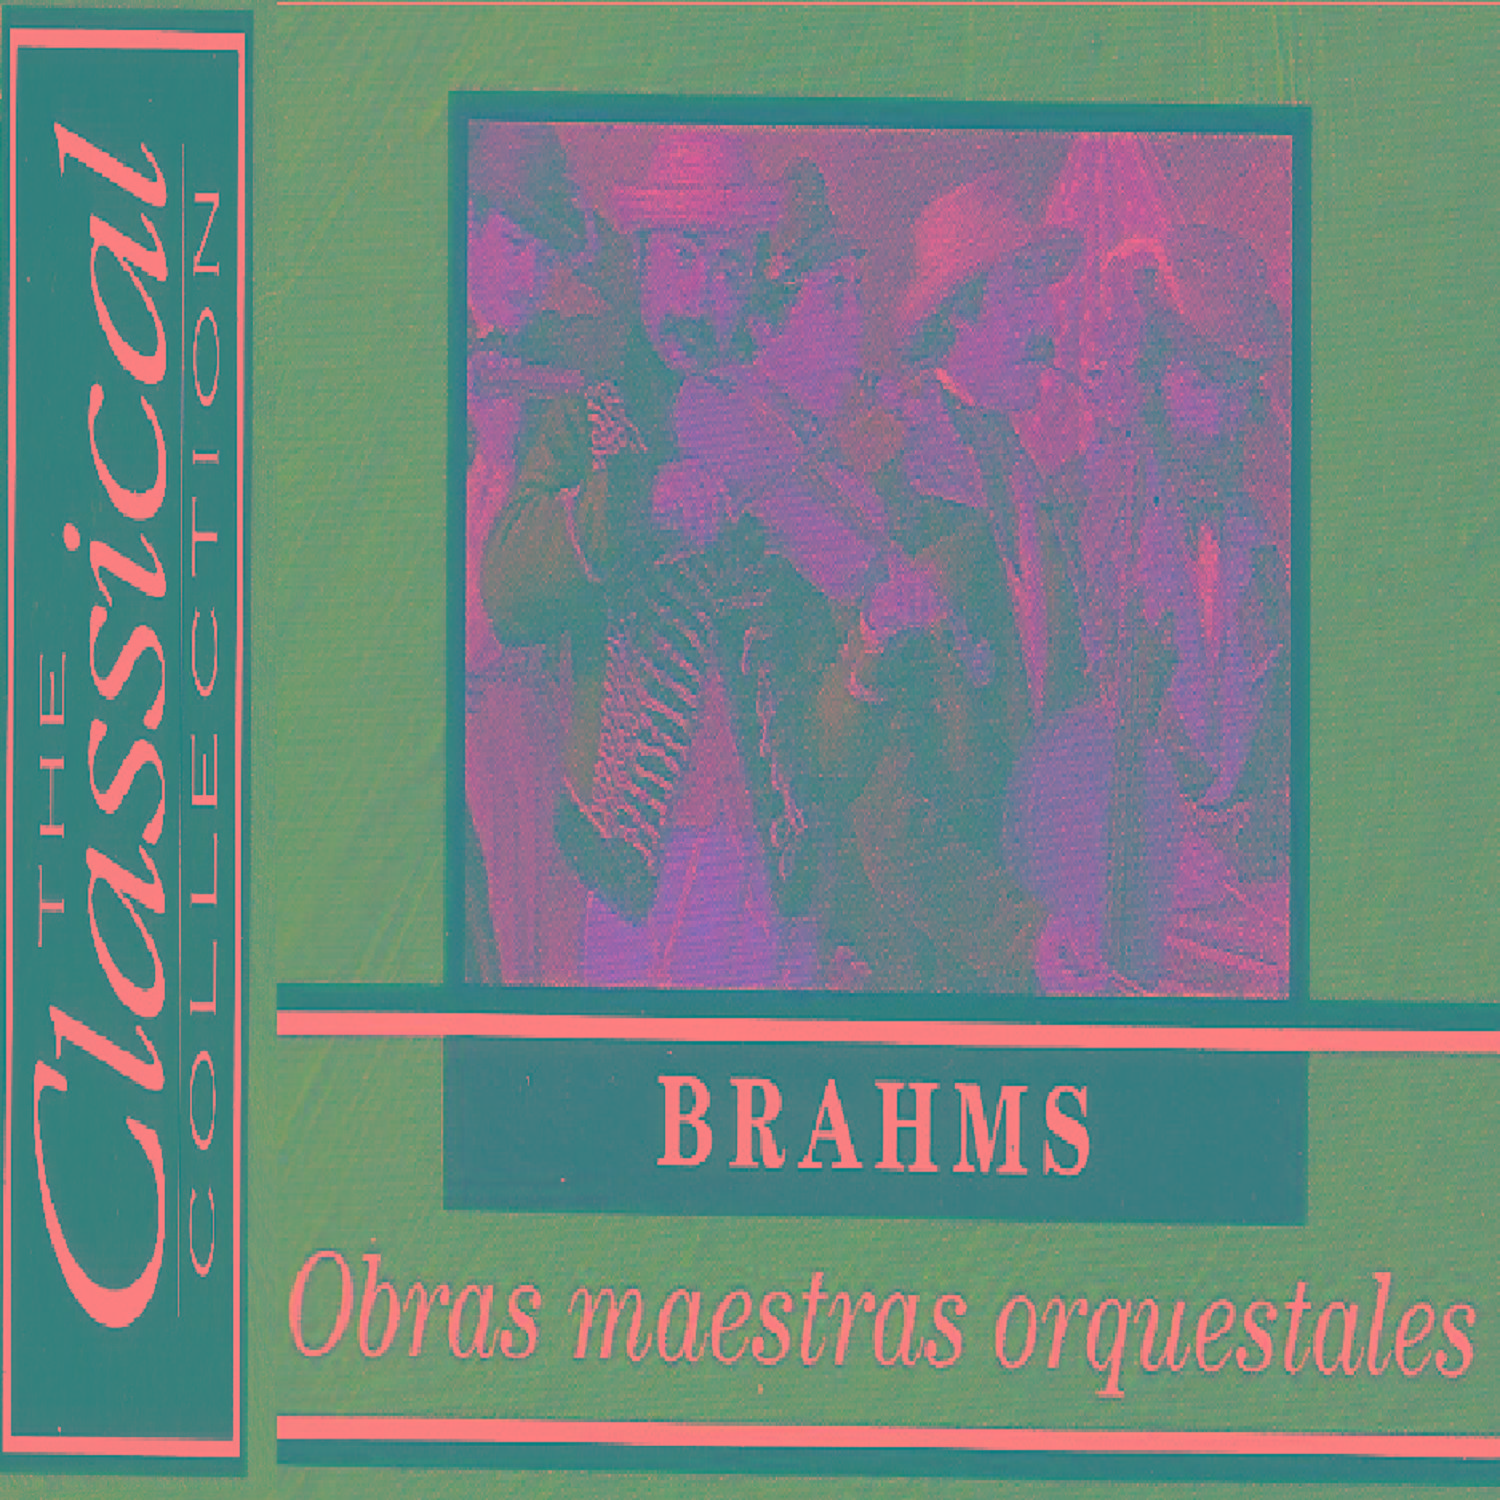 The Classical Colletion - Brahms - Obras maestras orquestrales